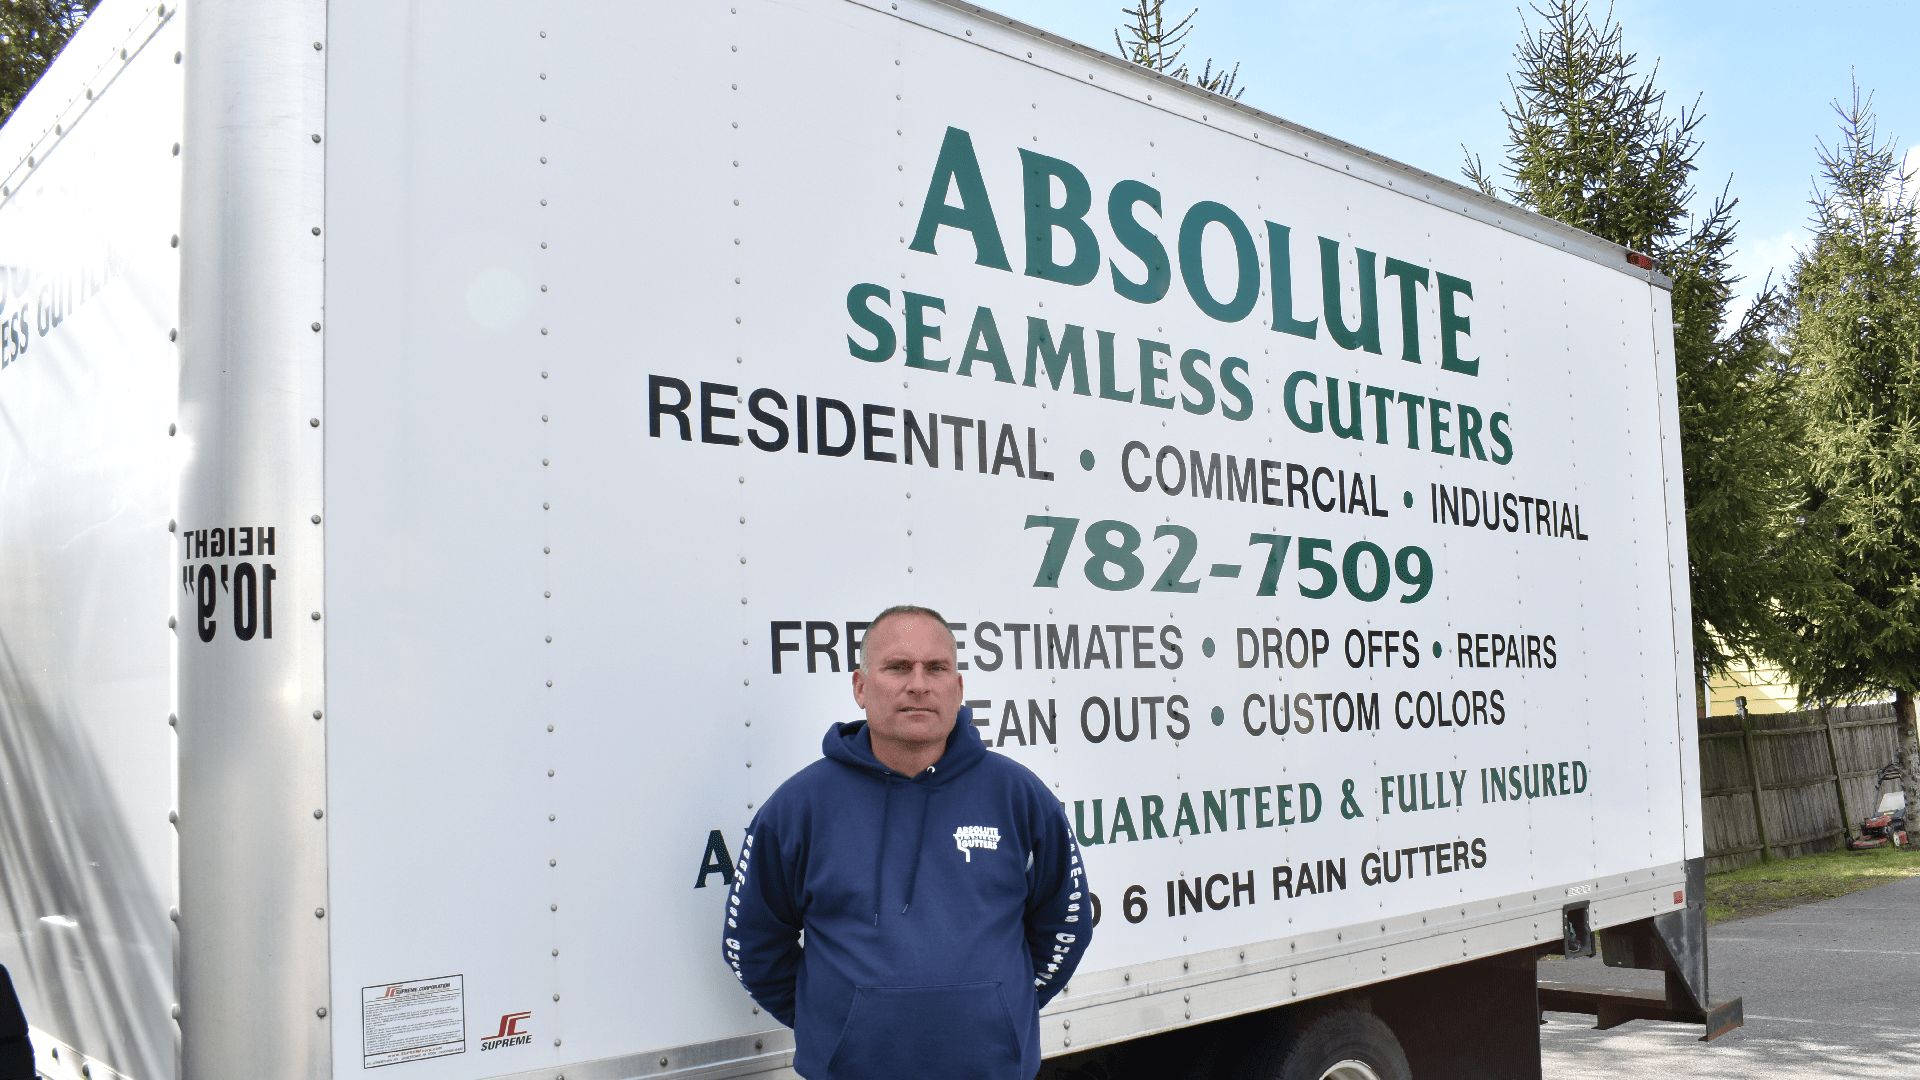 Absolute Seamless Gutters, Inc. - We're Your Gutter Resource!